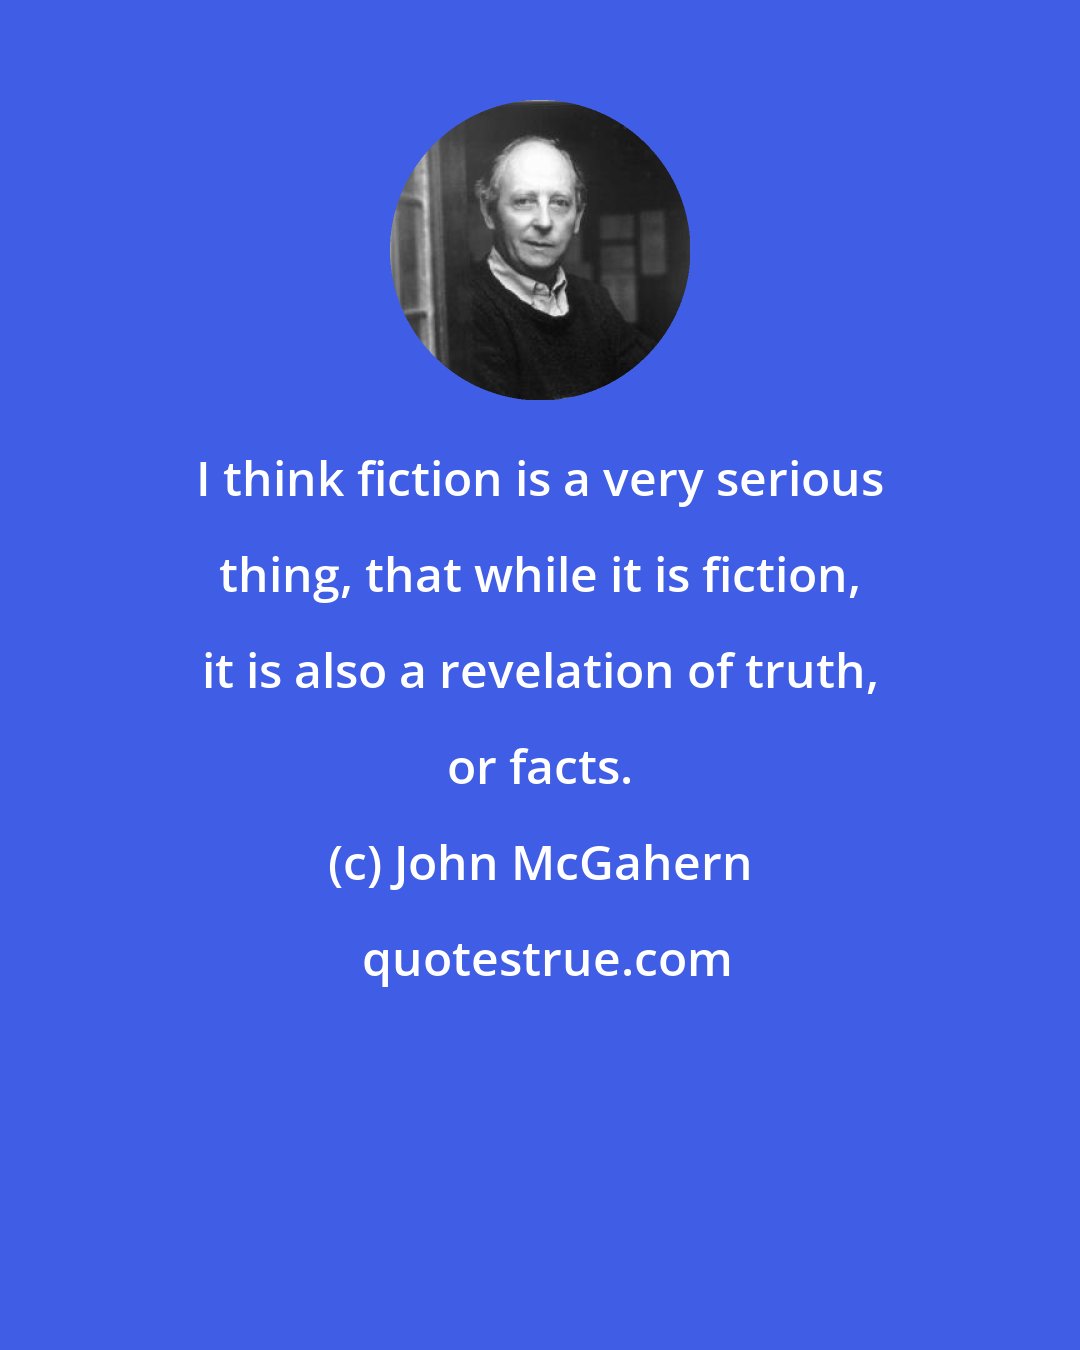 John McGahern: I think fiction is a very serious thing, that while it is fiction, it is also a revelation of truth, or facts.